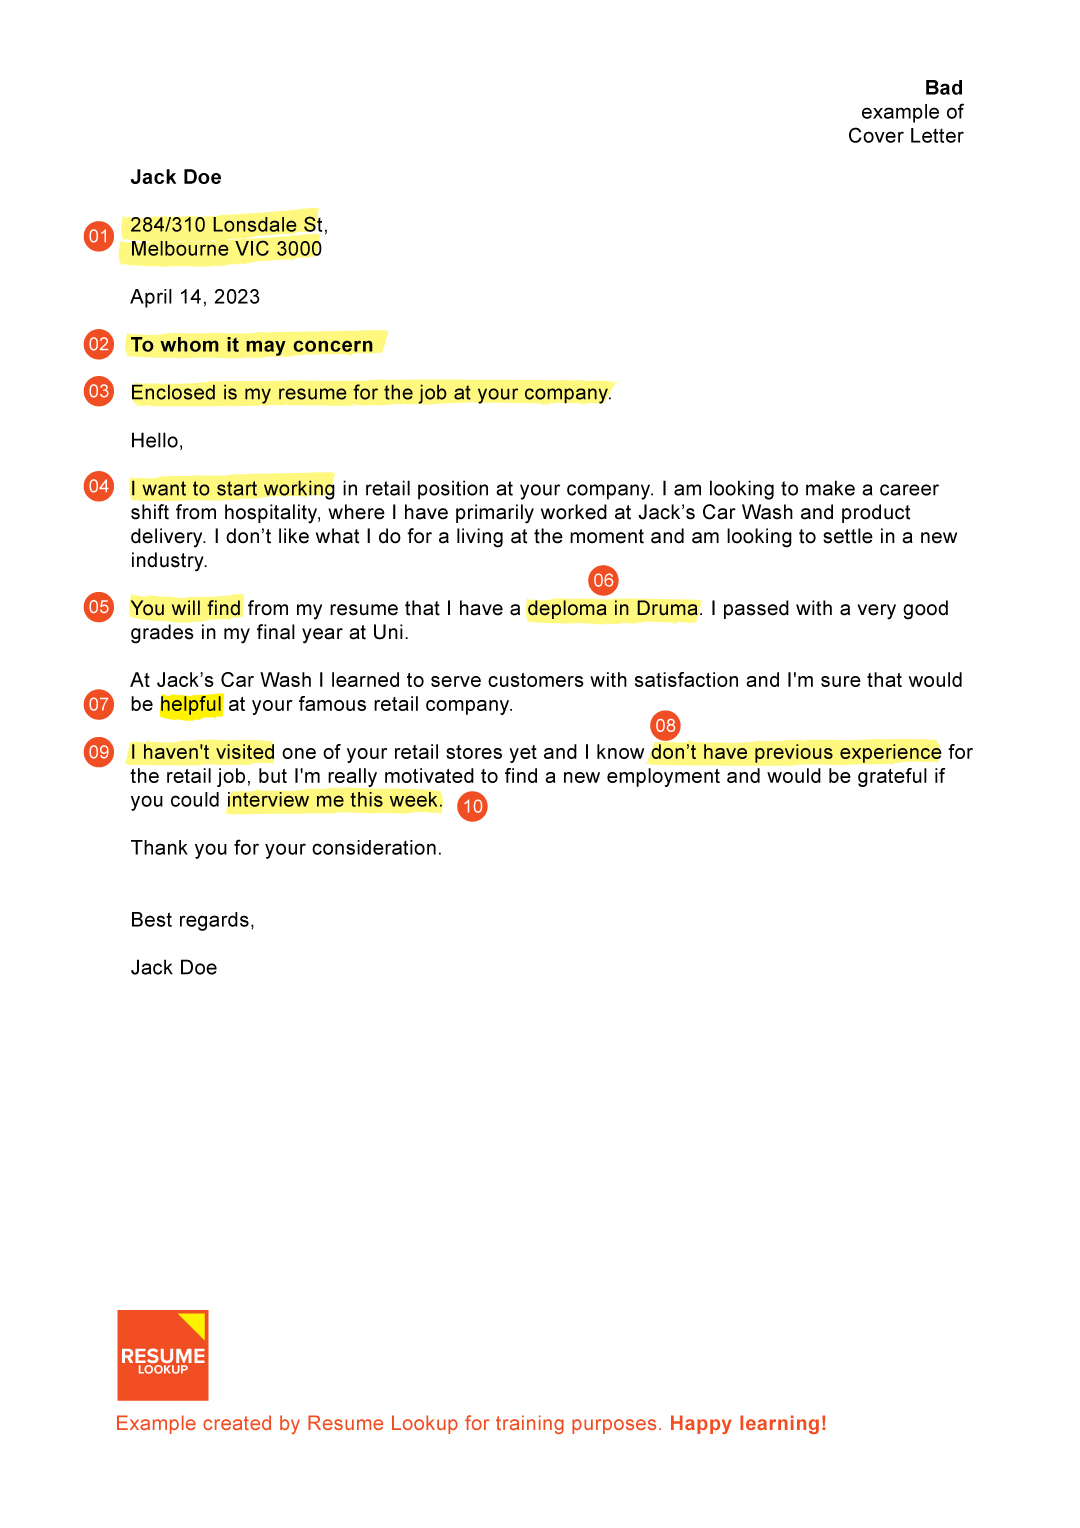 Bad-Cover-Letter-Example-Comparison-01